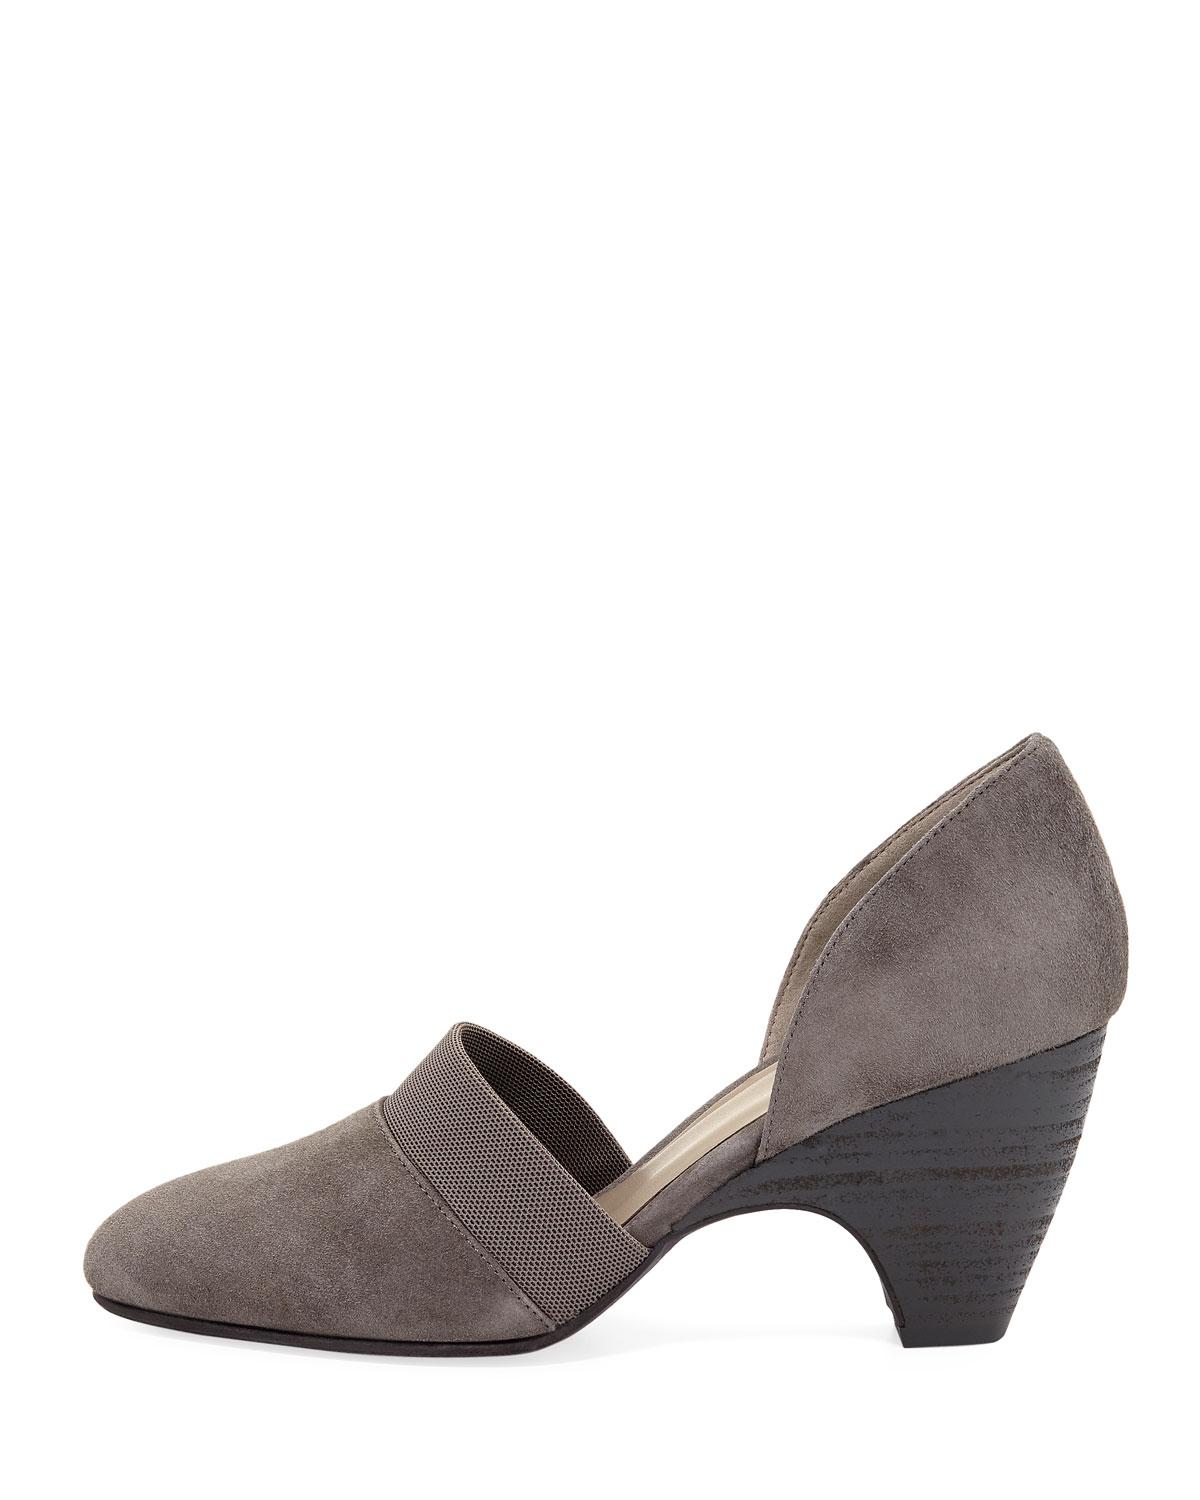 Eileen Fisher Bailey Suede D'orsay Pumps in Black - Lyst